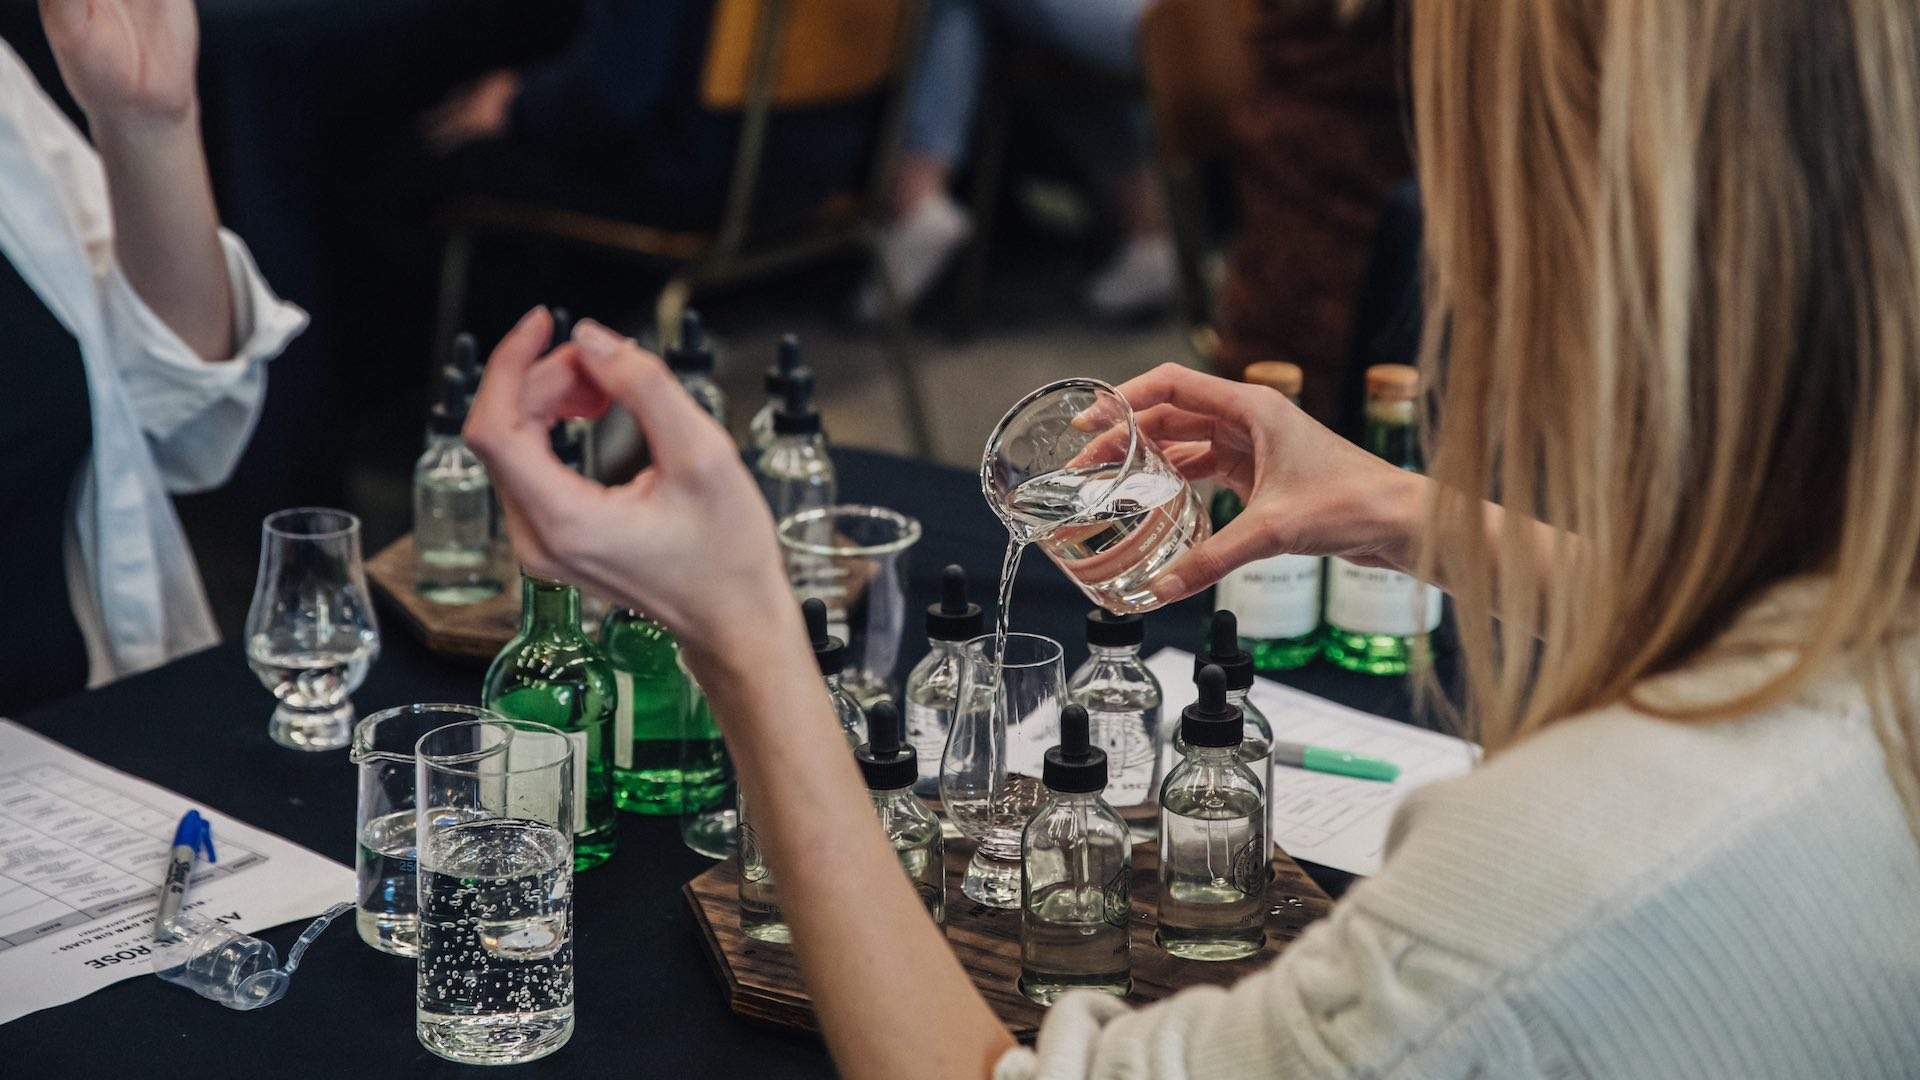 From Clay Play to Gin Blending: the Ultimate Experiential Pressies for the Person That Has Everything